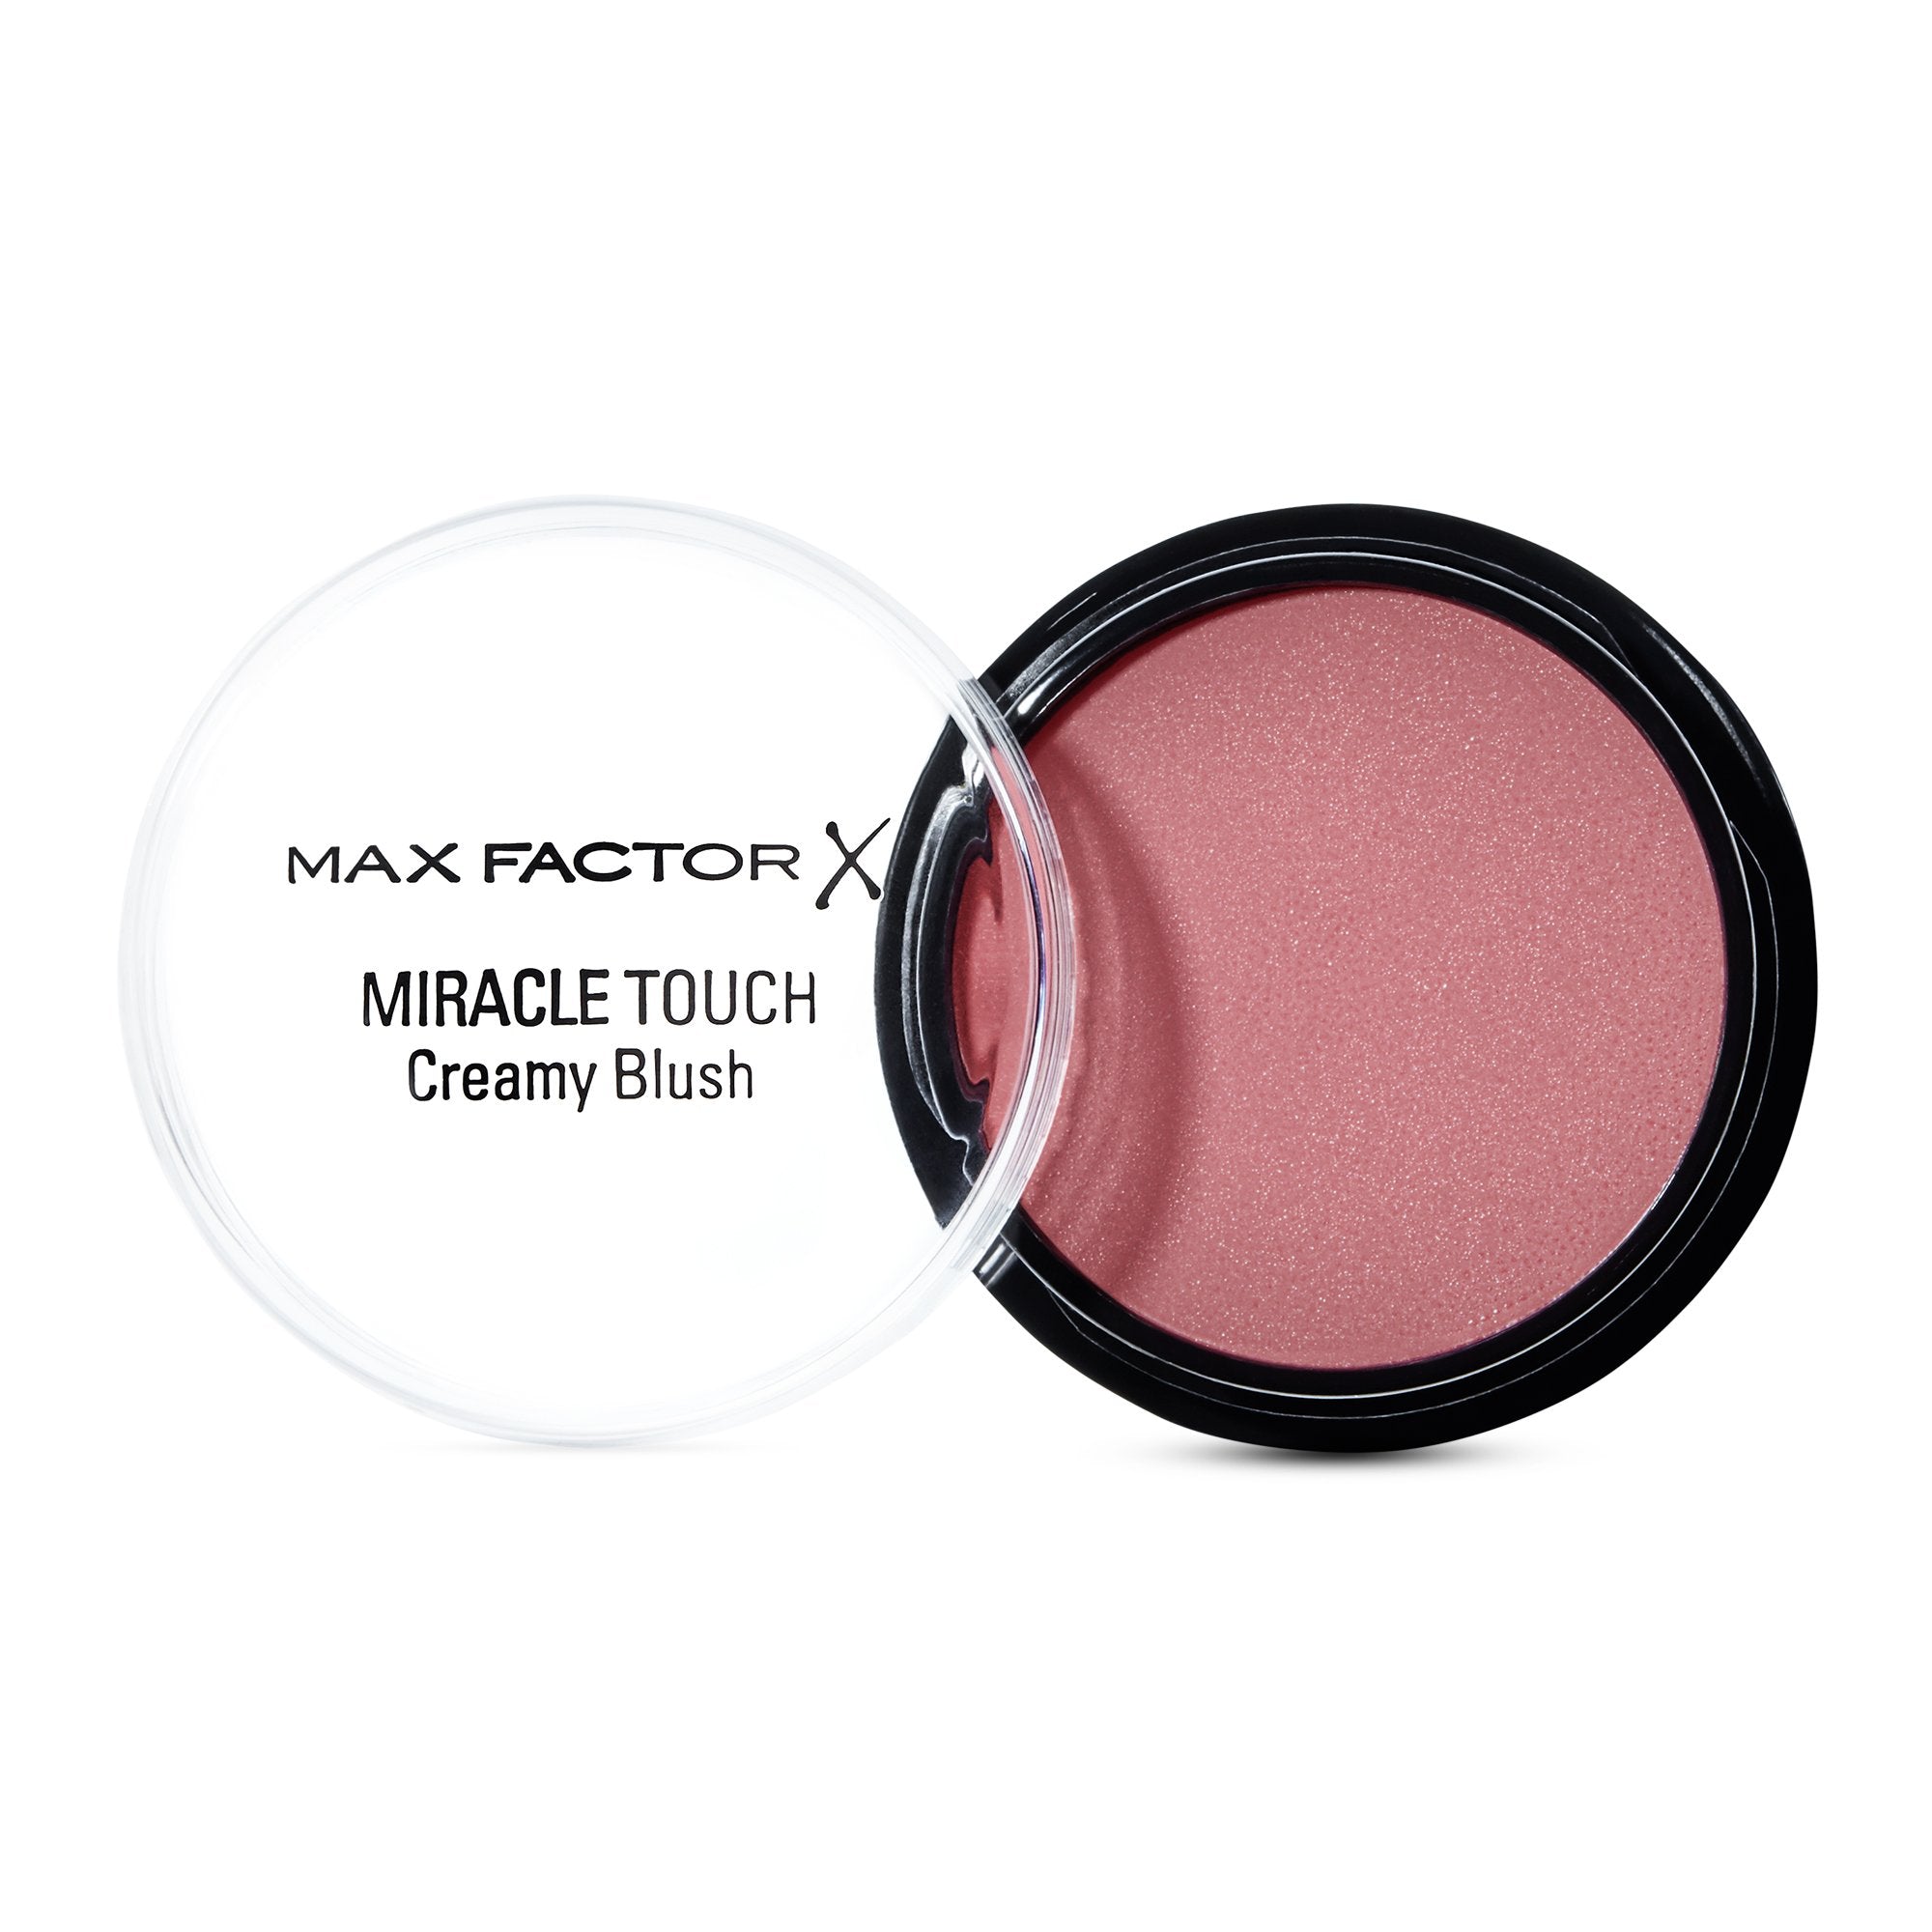 Max Factor Miracle Touch Creamy Blusher, 14 Soft Pink